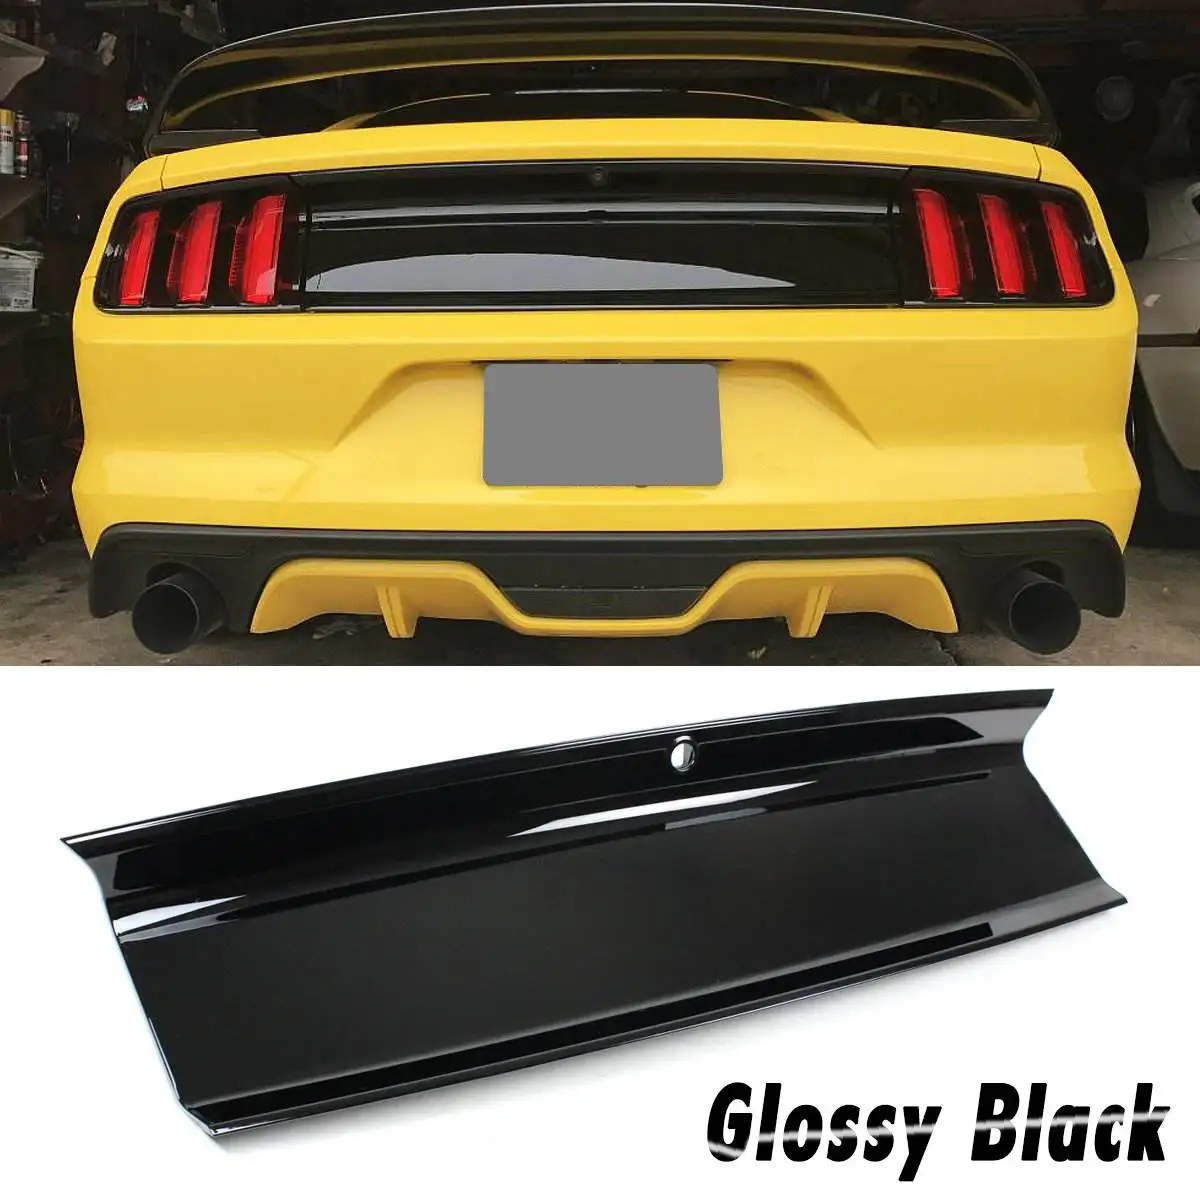 

Excellent Quallity ABS Glossy Black Car Rear Lid Trunk Decklid Panel Cover Kit For Ford For Mustang 2015-2019 Car Accessories